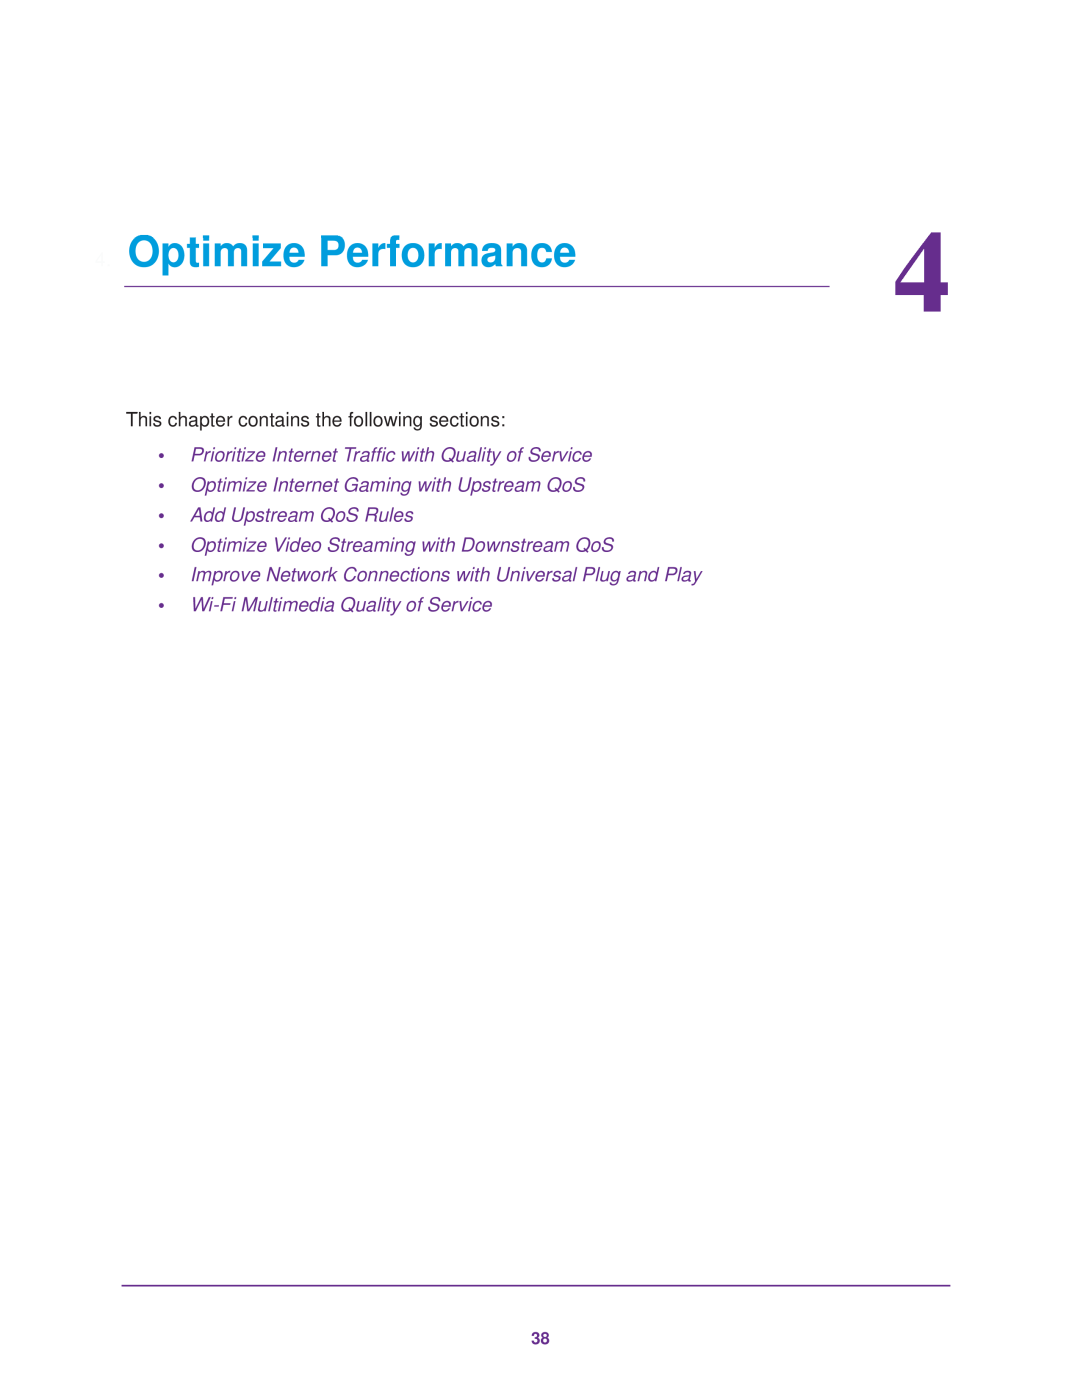 NETGEAR R7000 user manual Optimize Performance, Prioritize Internet Traffic with Quality of Service 